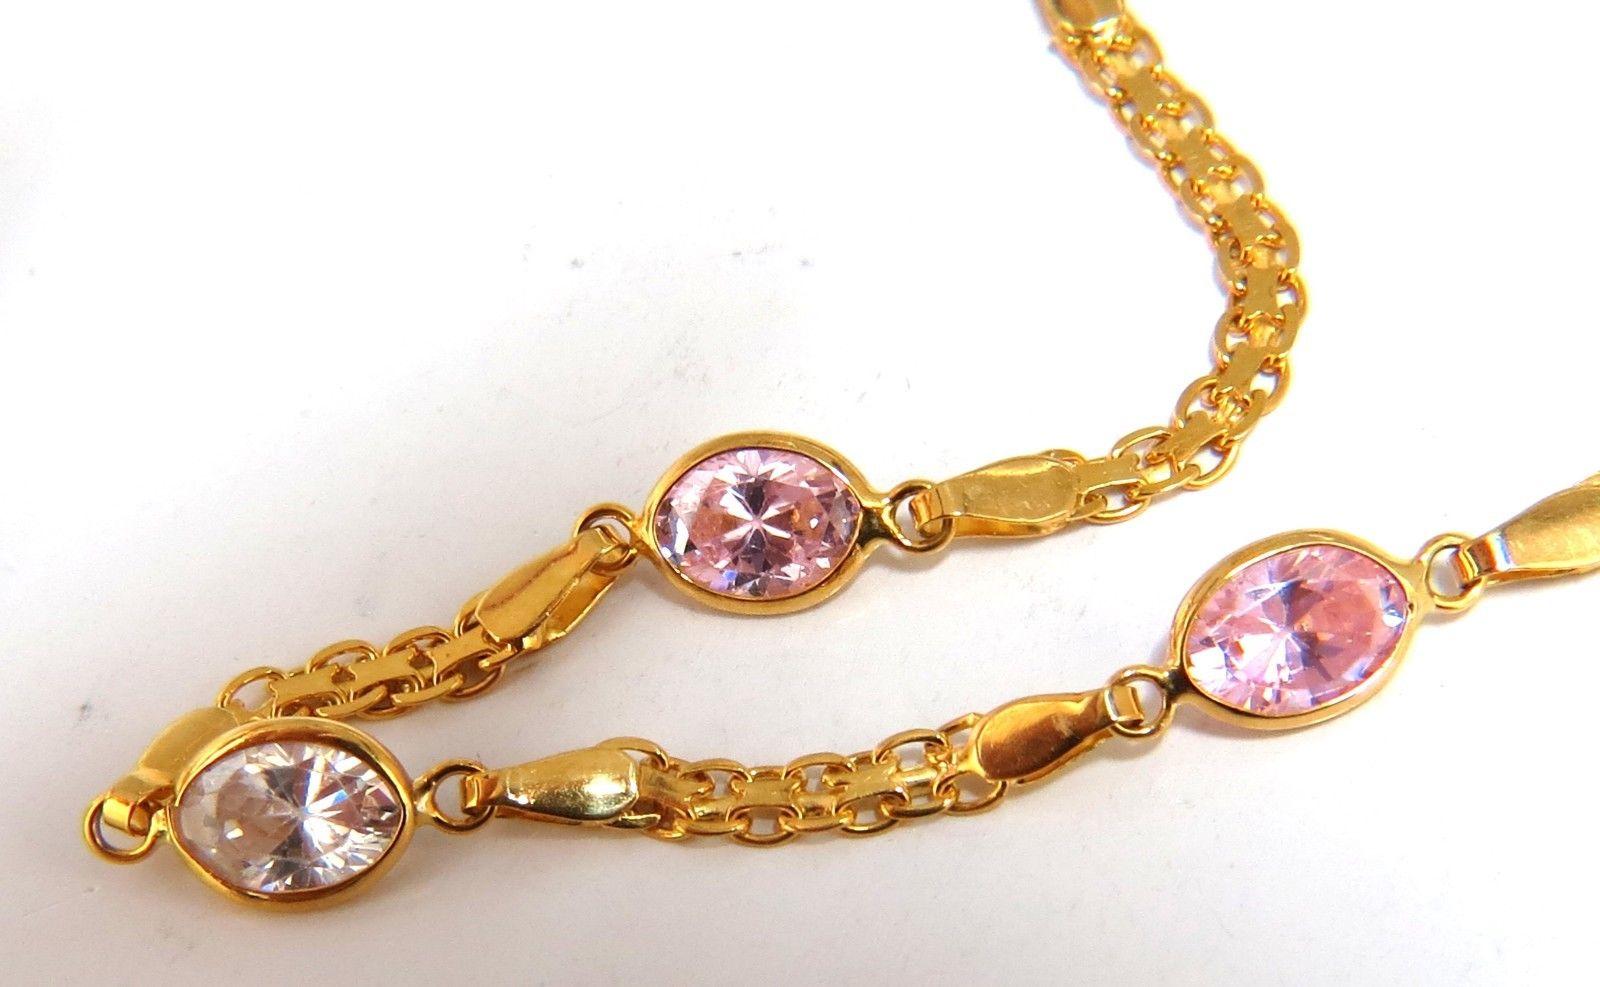 4.50ct Cubic Zircon Pinks & White Bracelet

Secure pressure clasp 

4.8 grams.

14kt. Yellow gold. 

Measures 7 inches (wearable length)

3mm wide Chain